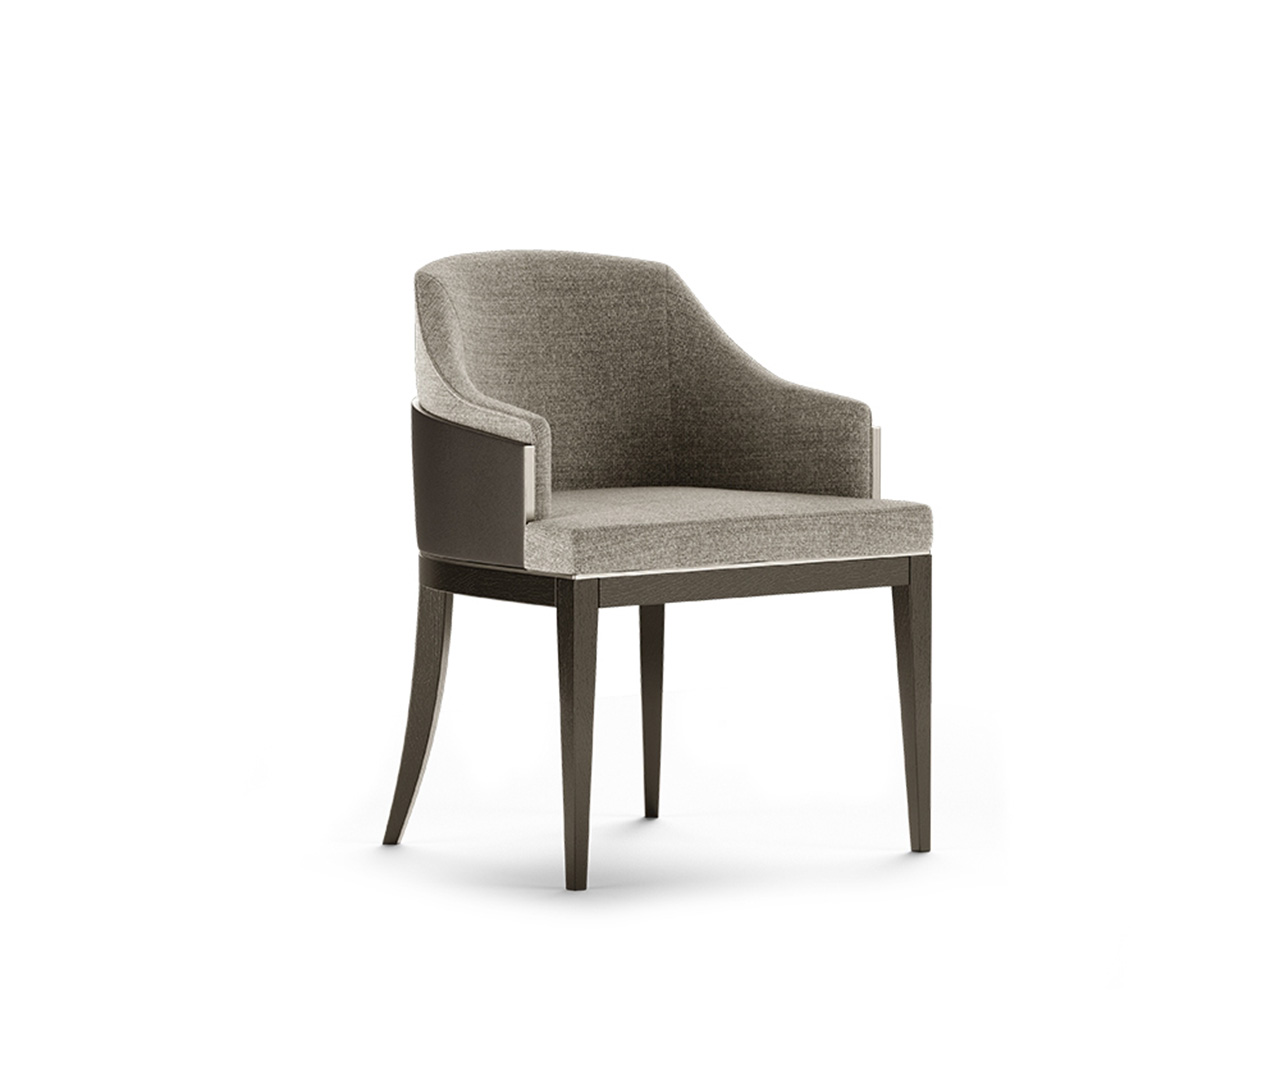 Bold Modern Upholstered Dining Chairs